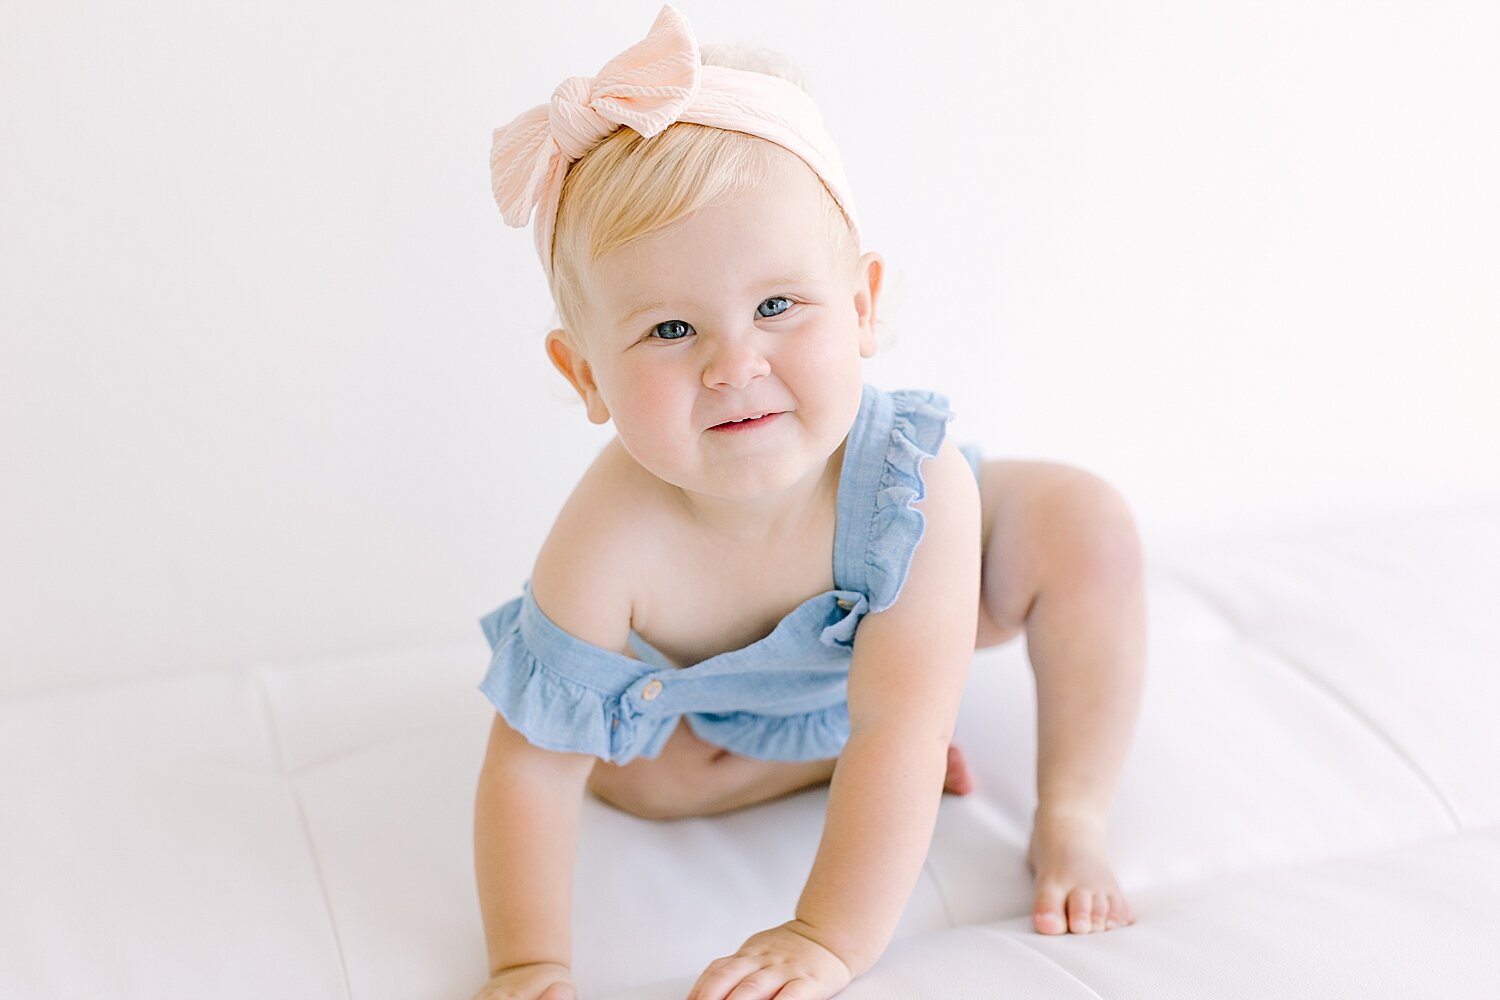 One year old baby girl in Newport Beach studio for first birthday session with Ambre Williams Photography.